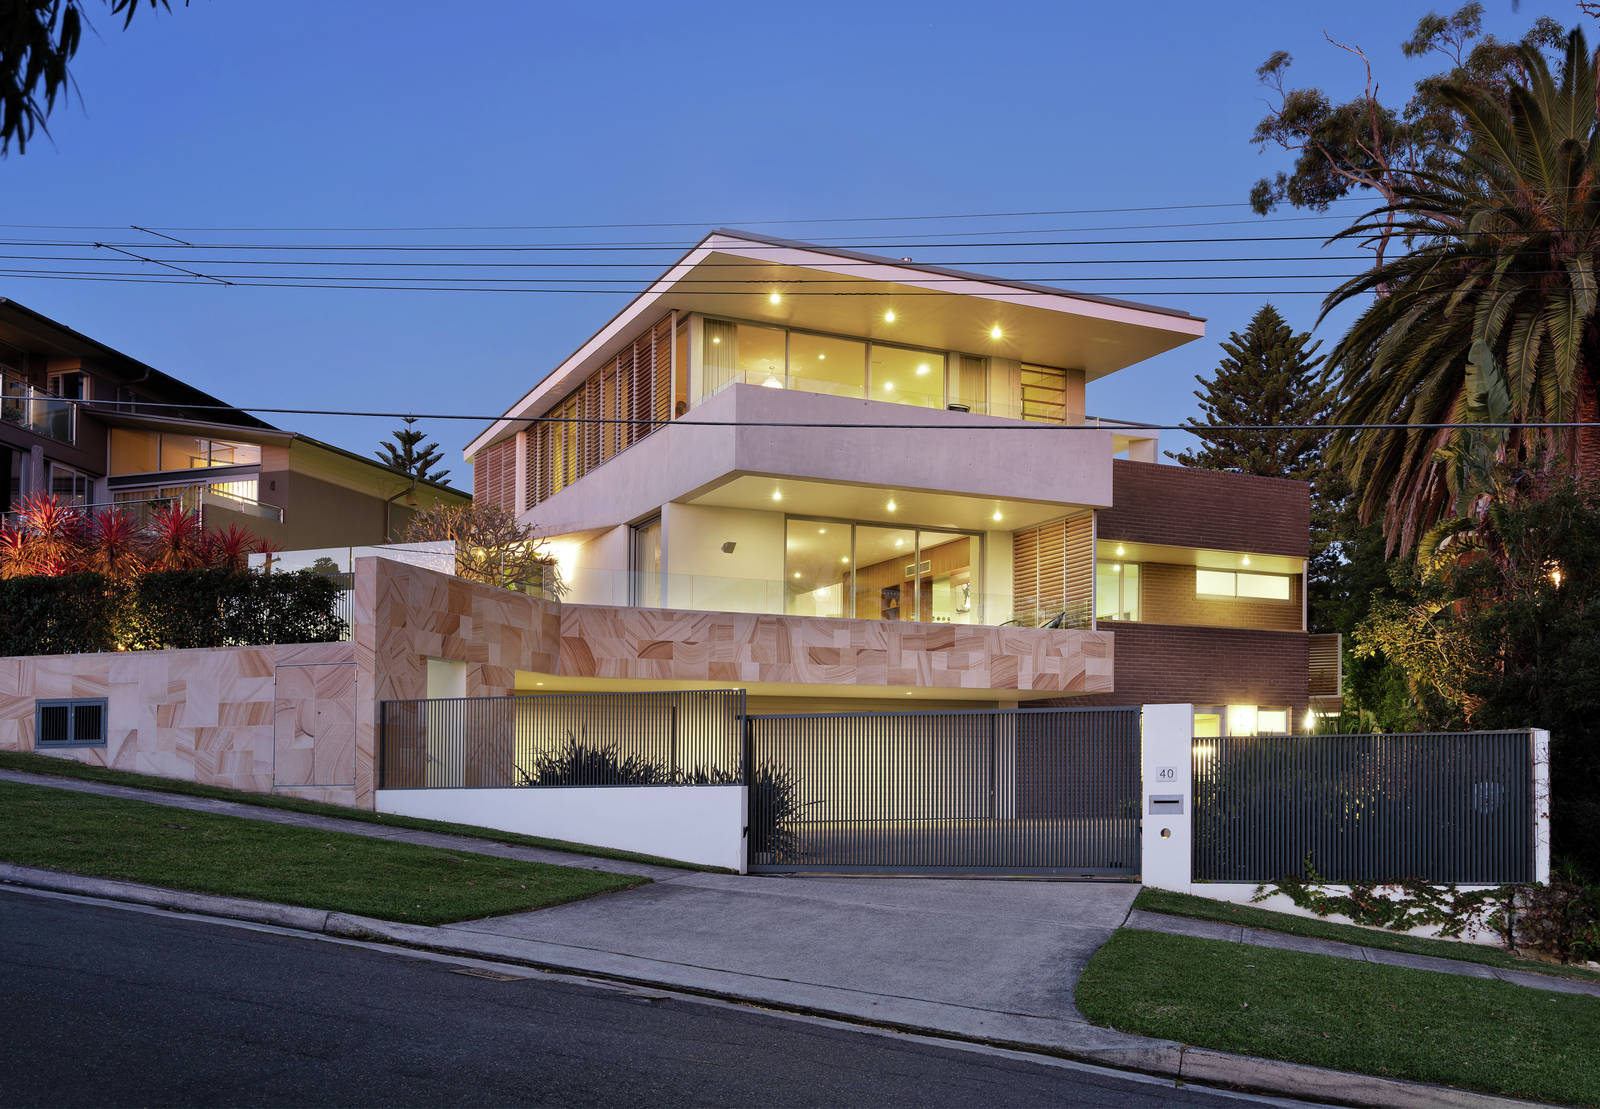 40 Beatrice Street, Balgowlah Heights featured